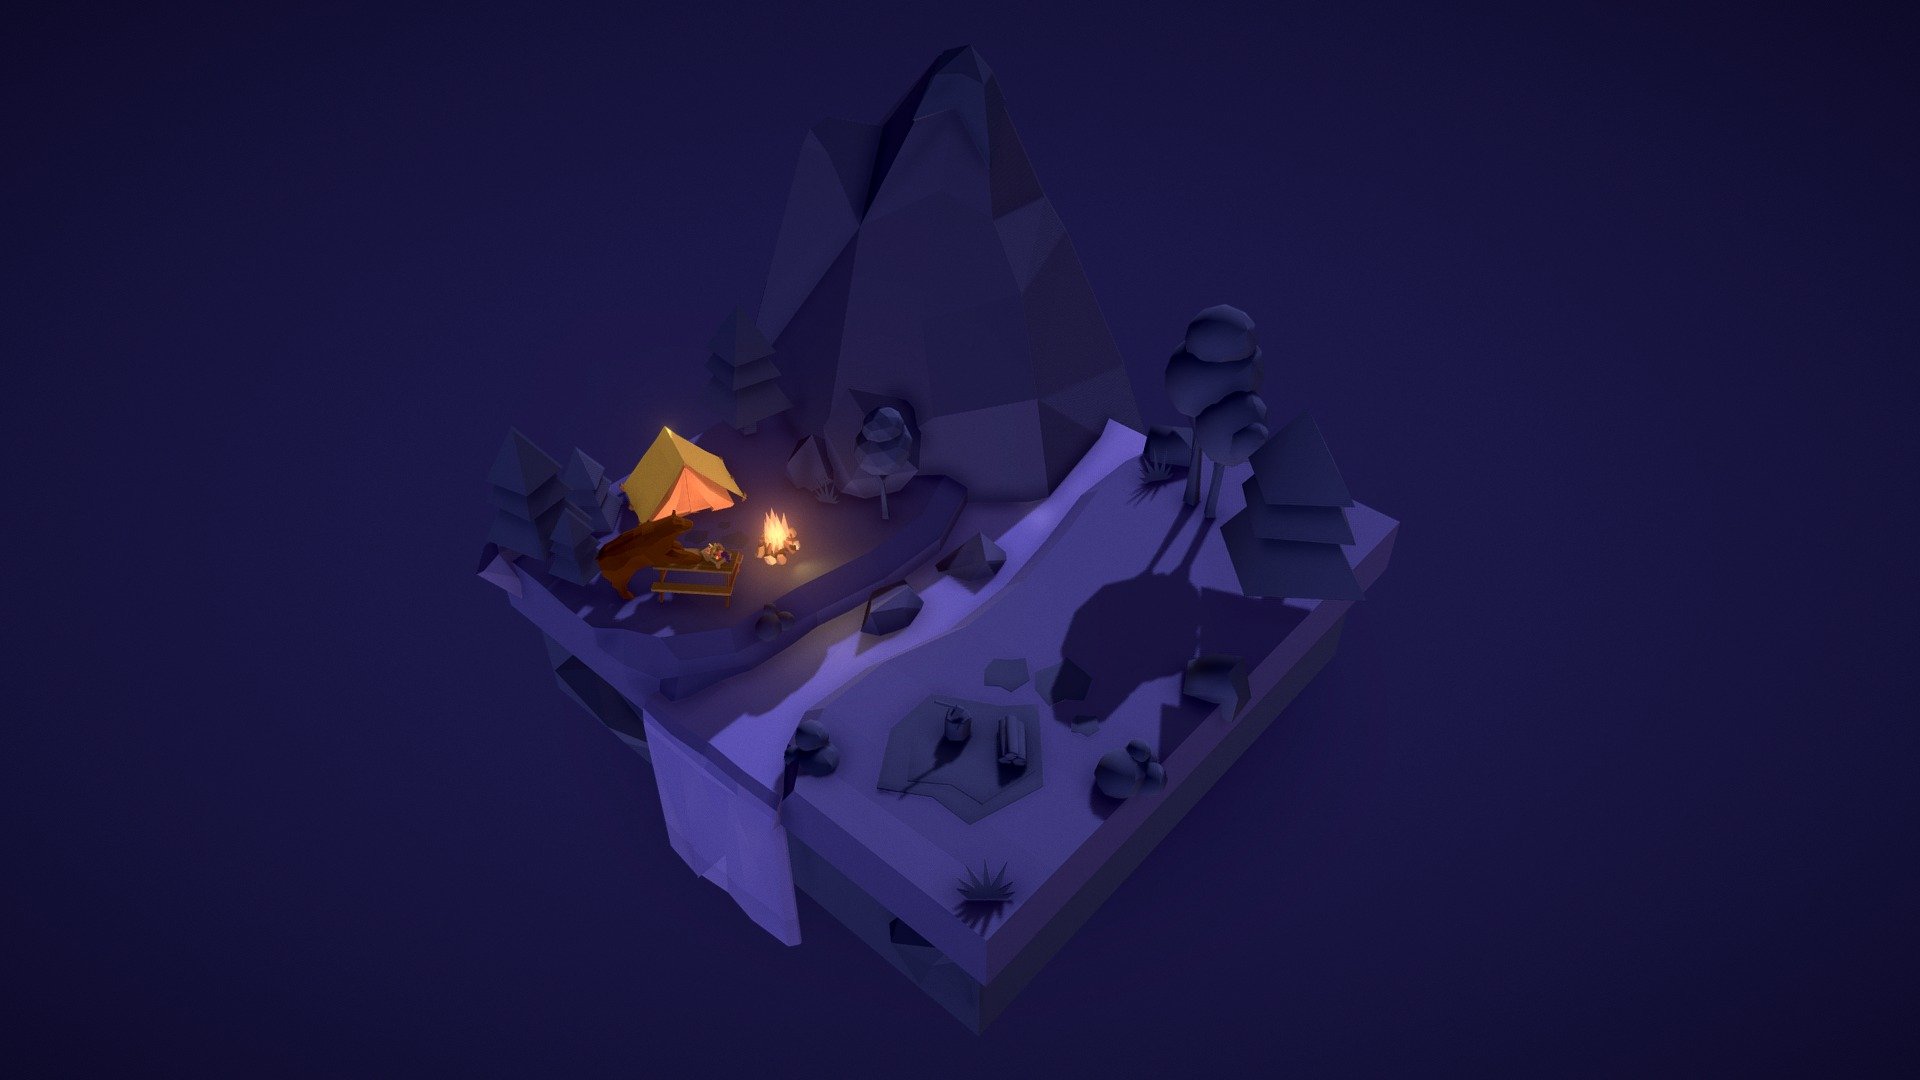 Camping Weekend (Night) - Low poly landscape